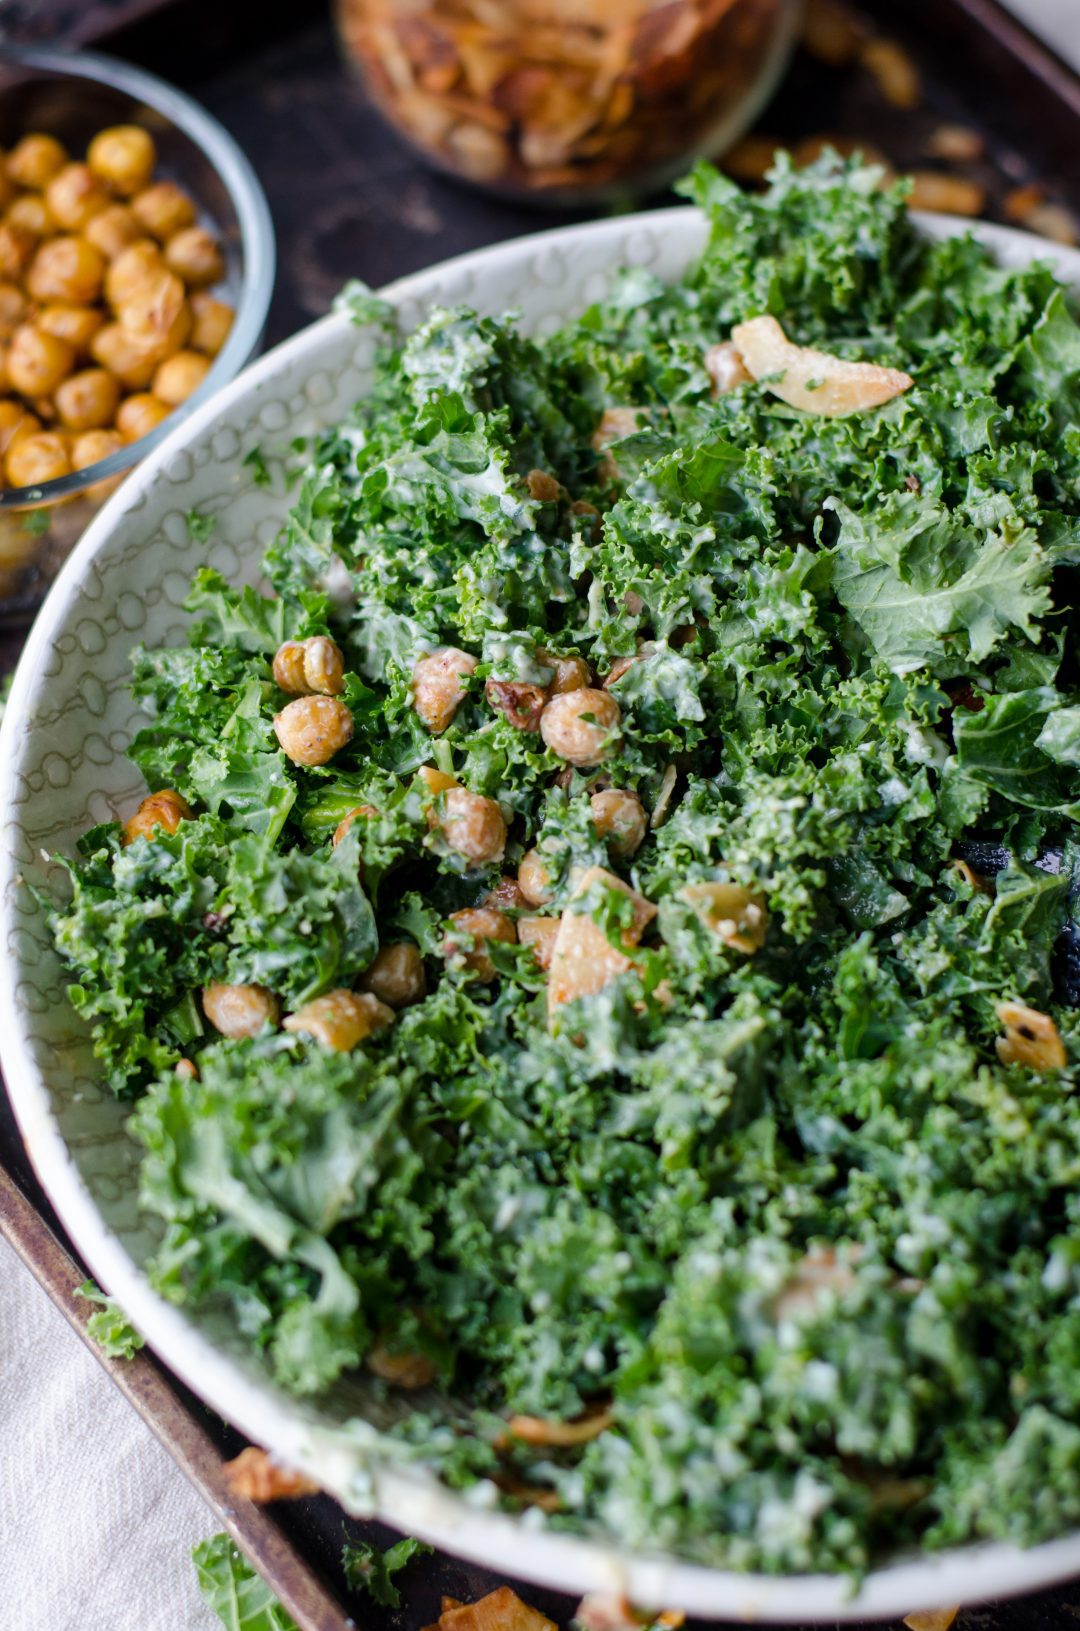 Kale Salad with Cashews and Chickpeas